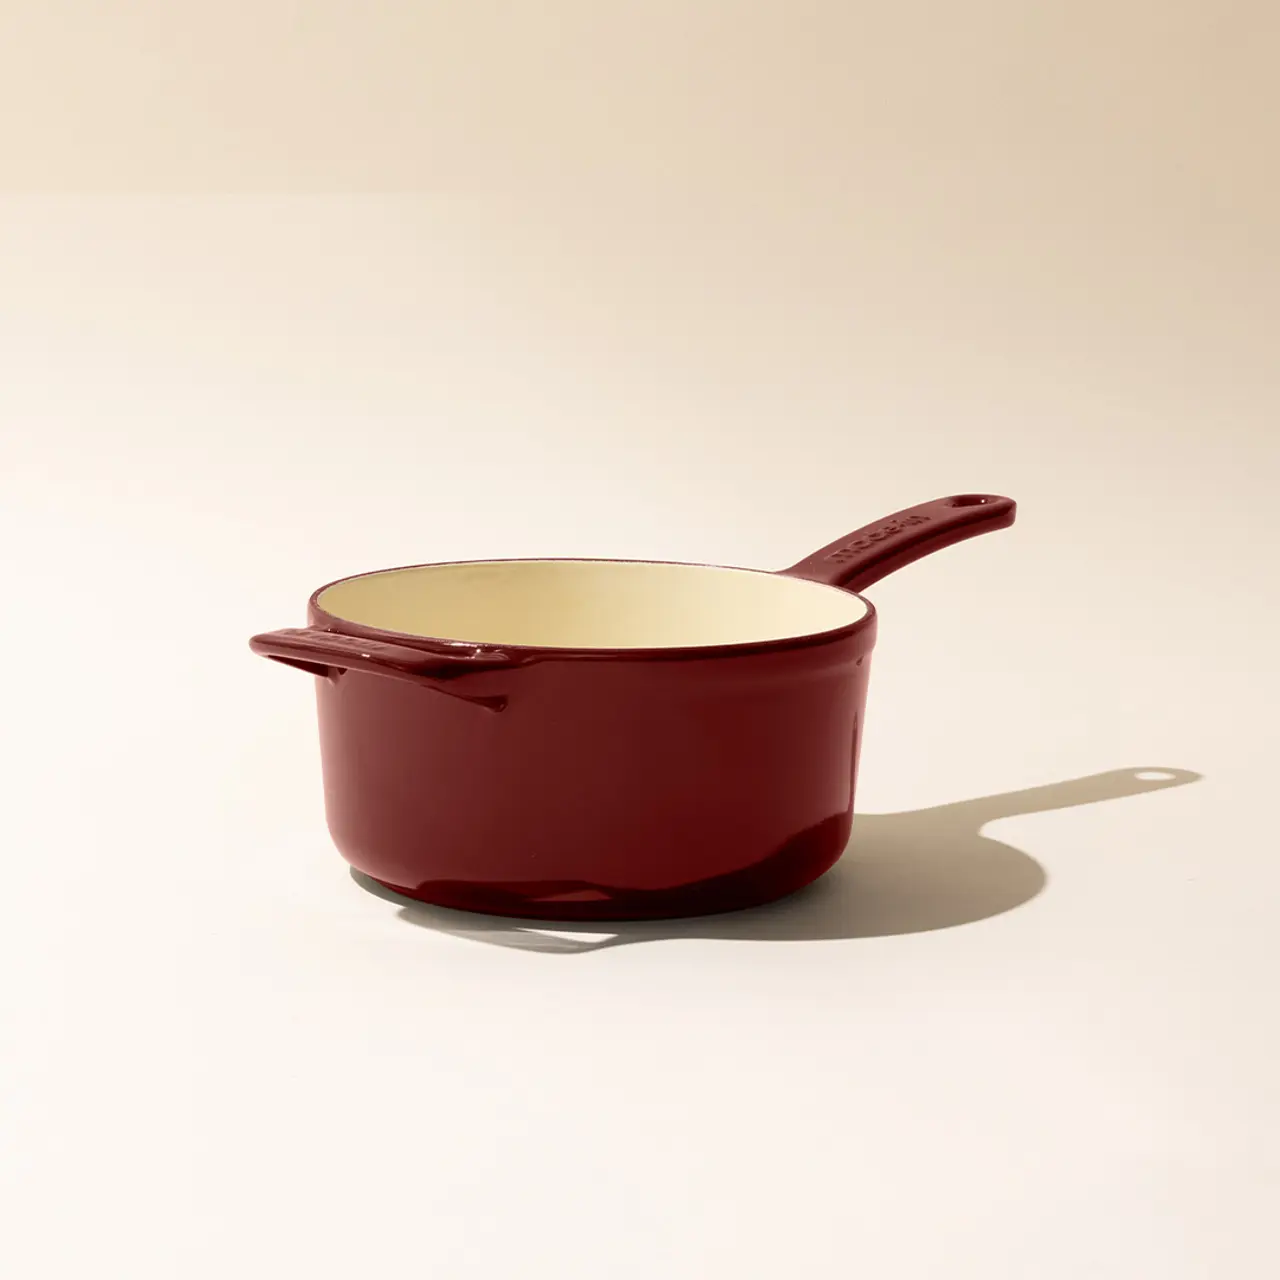 enameled cast iron saucepan ruby red no lid